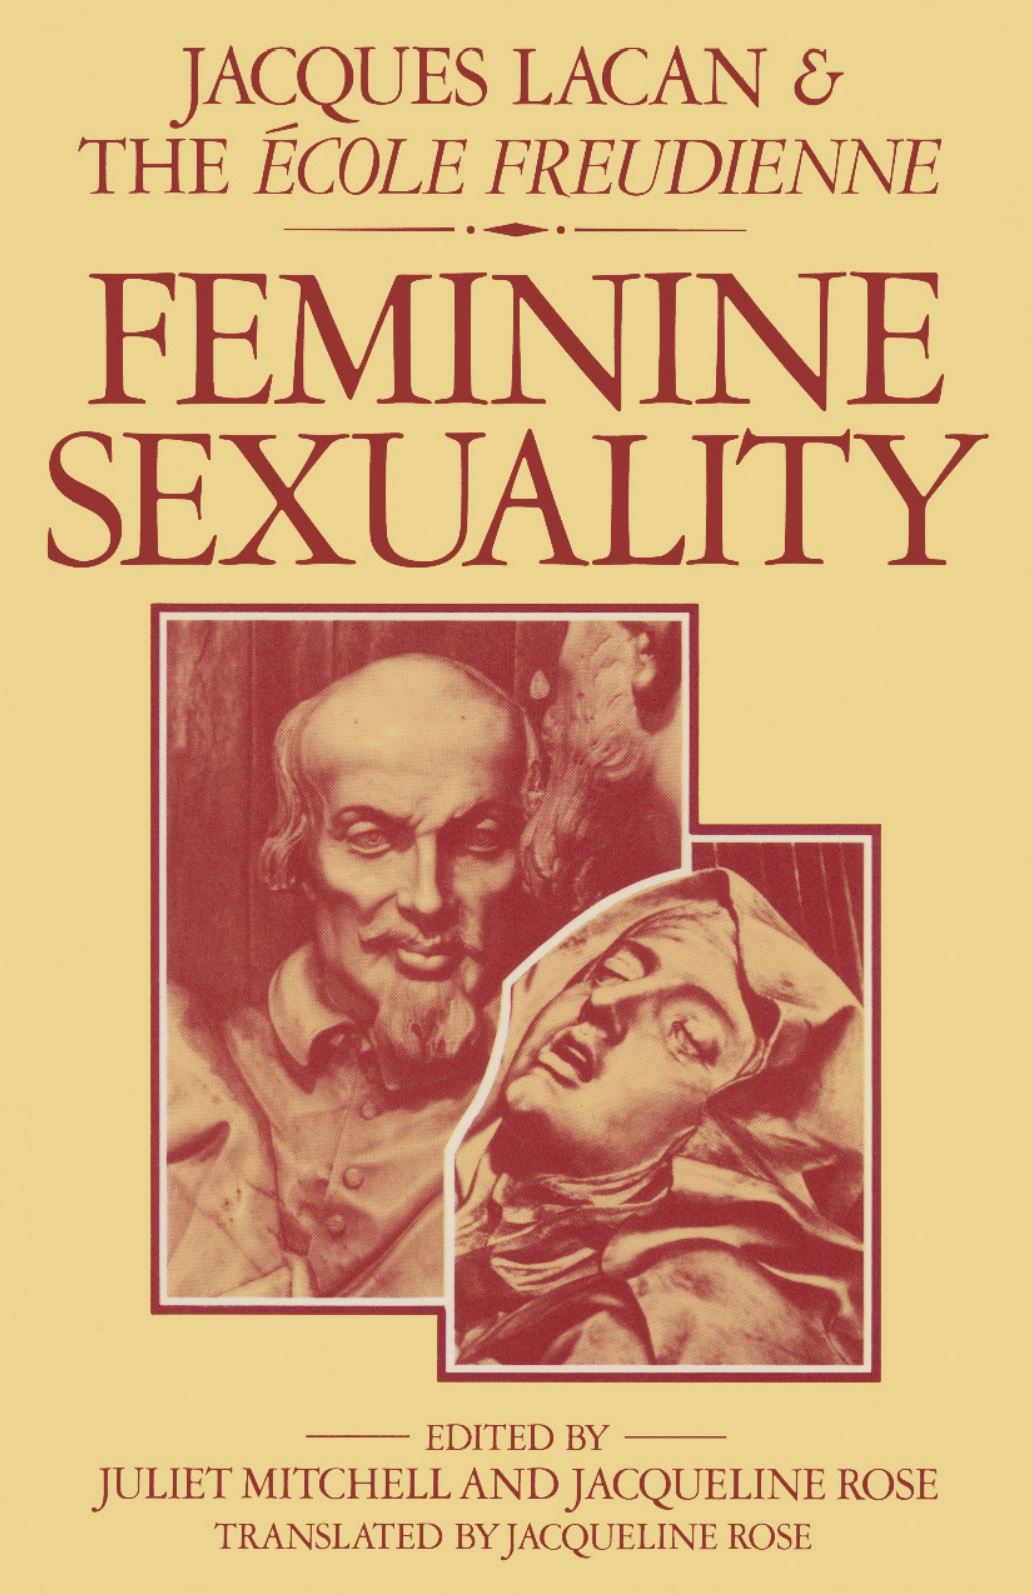 Jacques-lacan-feminine-sexuality-jacques-lacan-and-the-ecole-freudienne.jpg